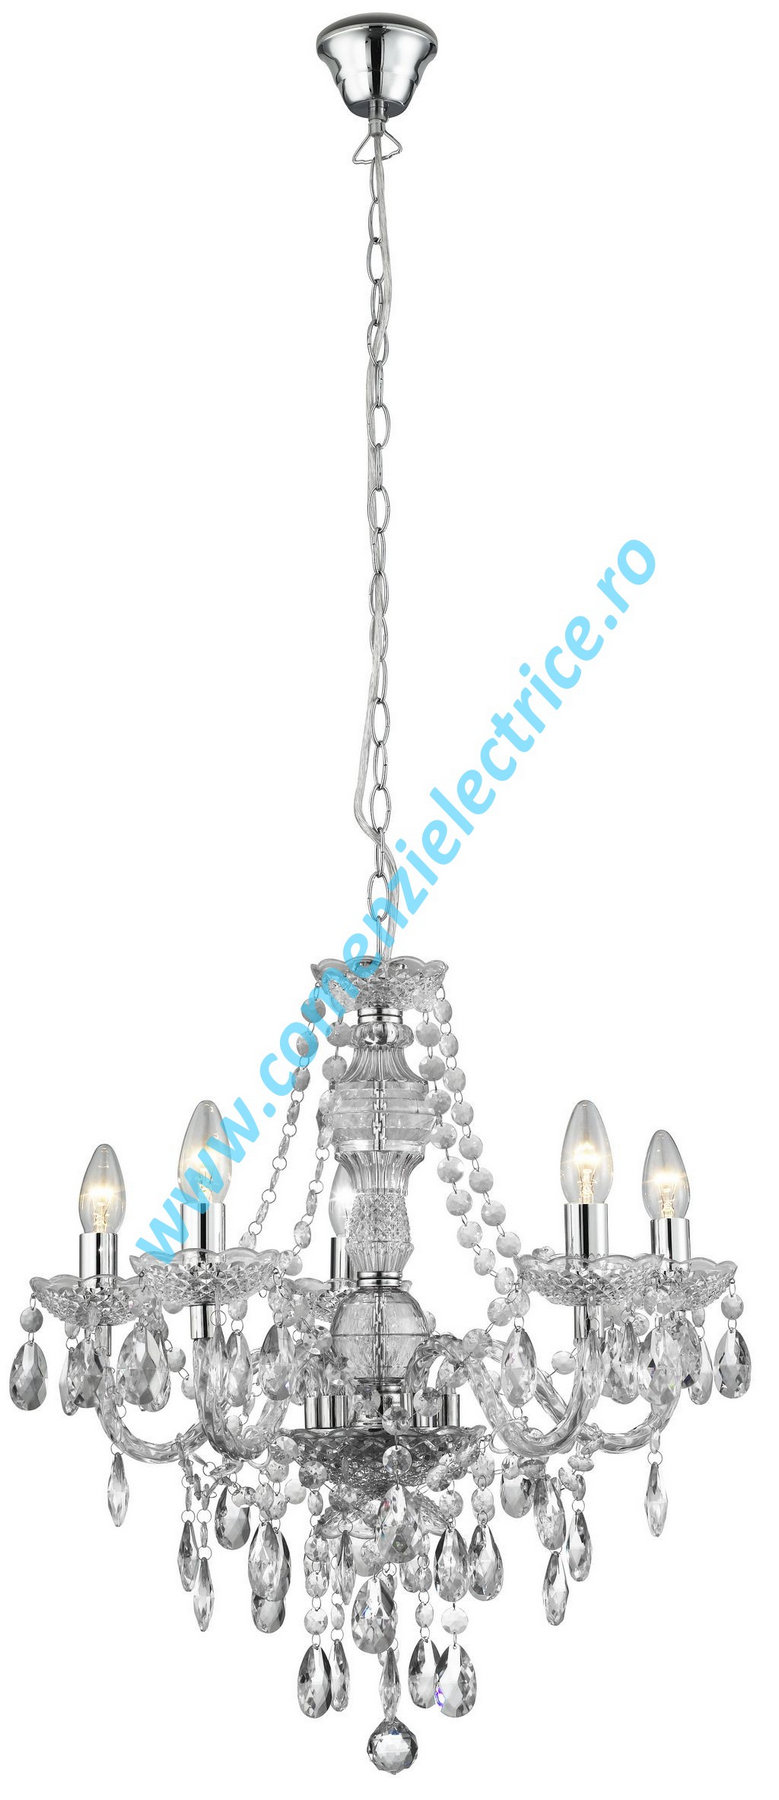 Candelabru Marie Therese 8885-5CL crom 5x60W E14